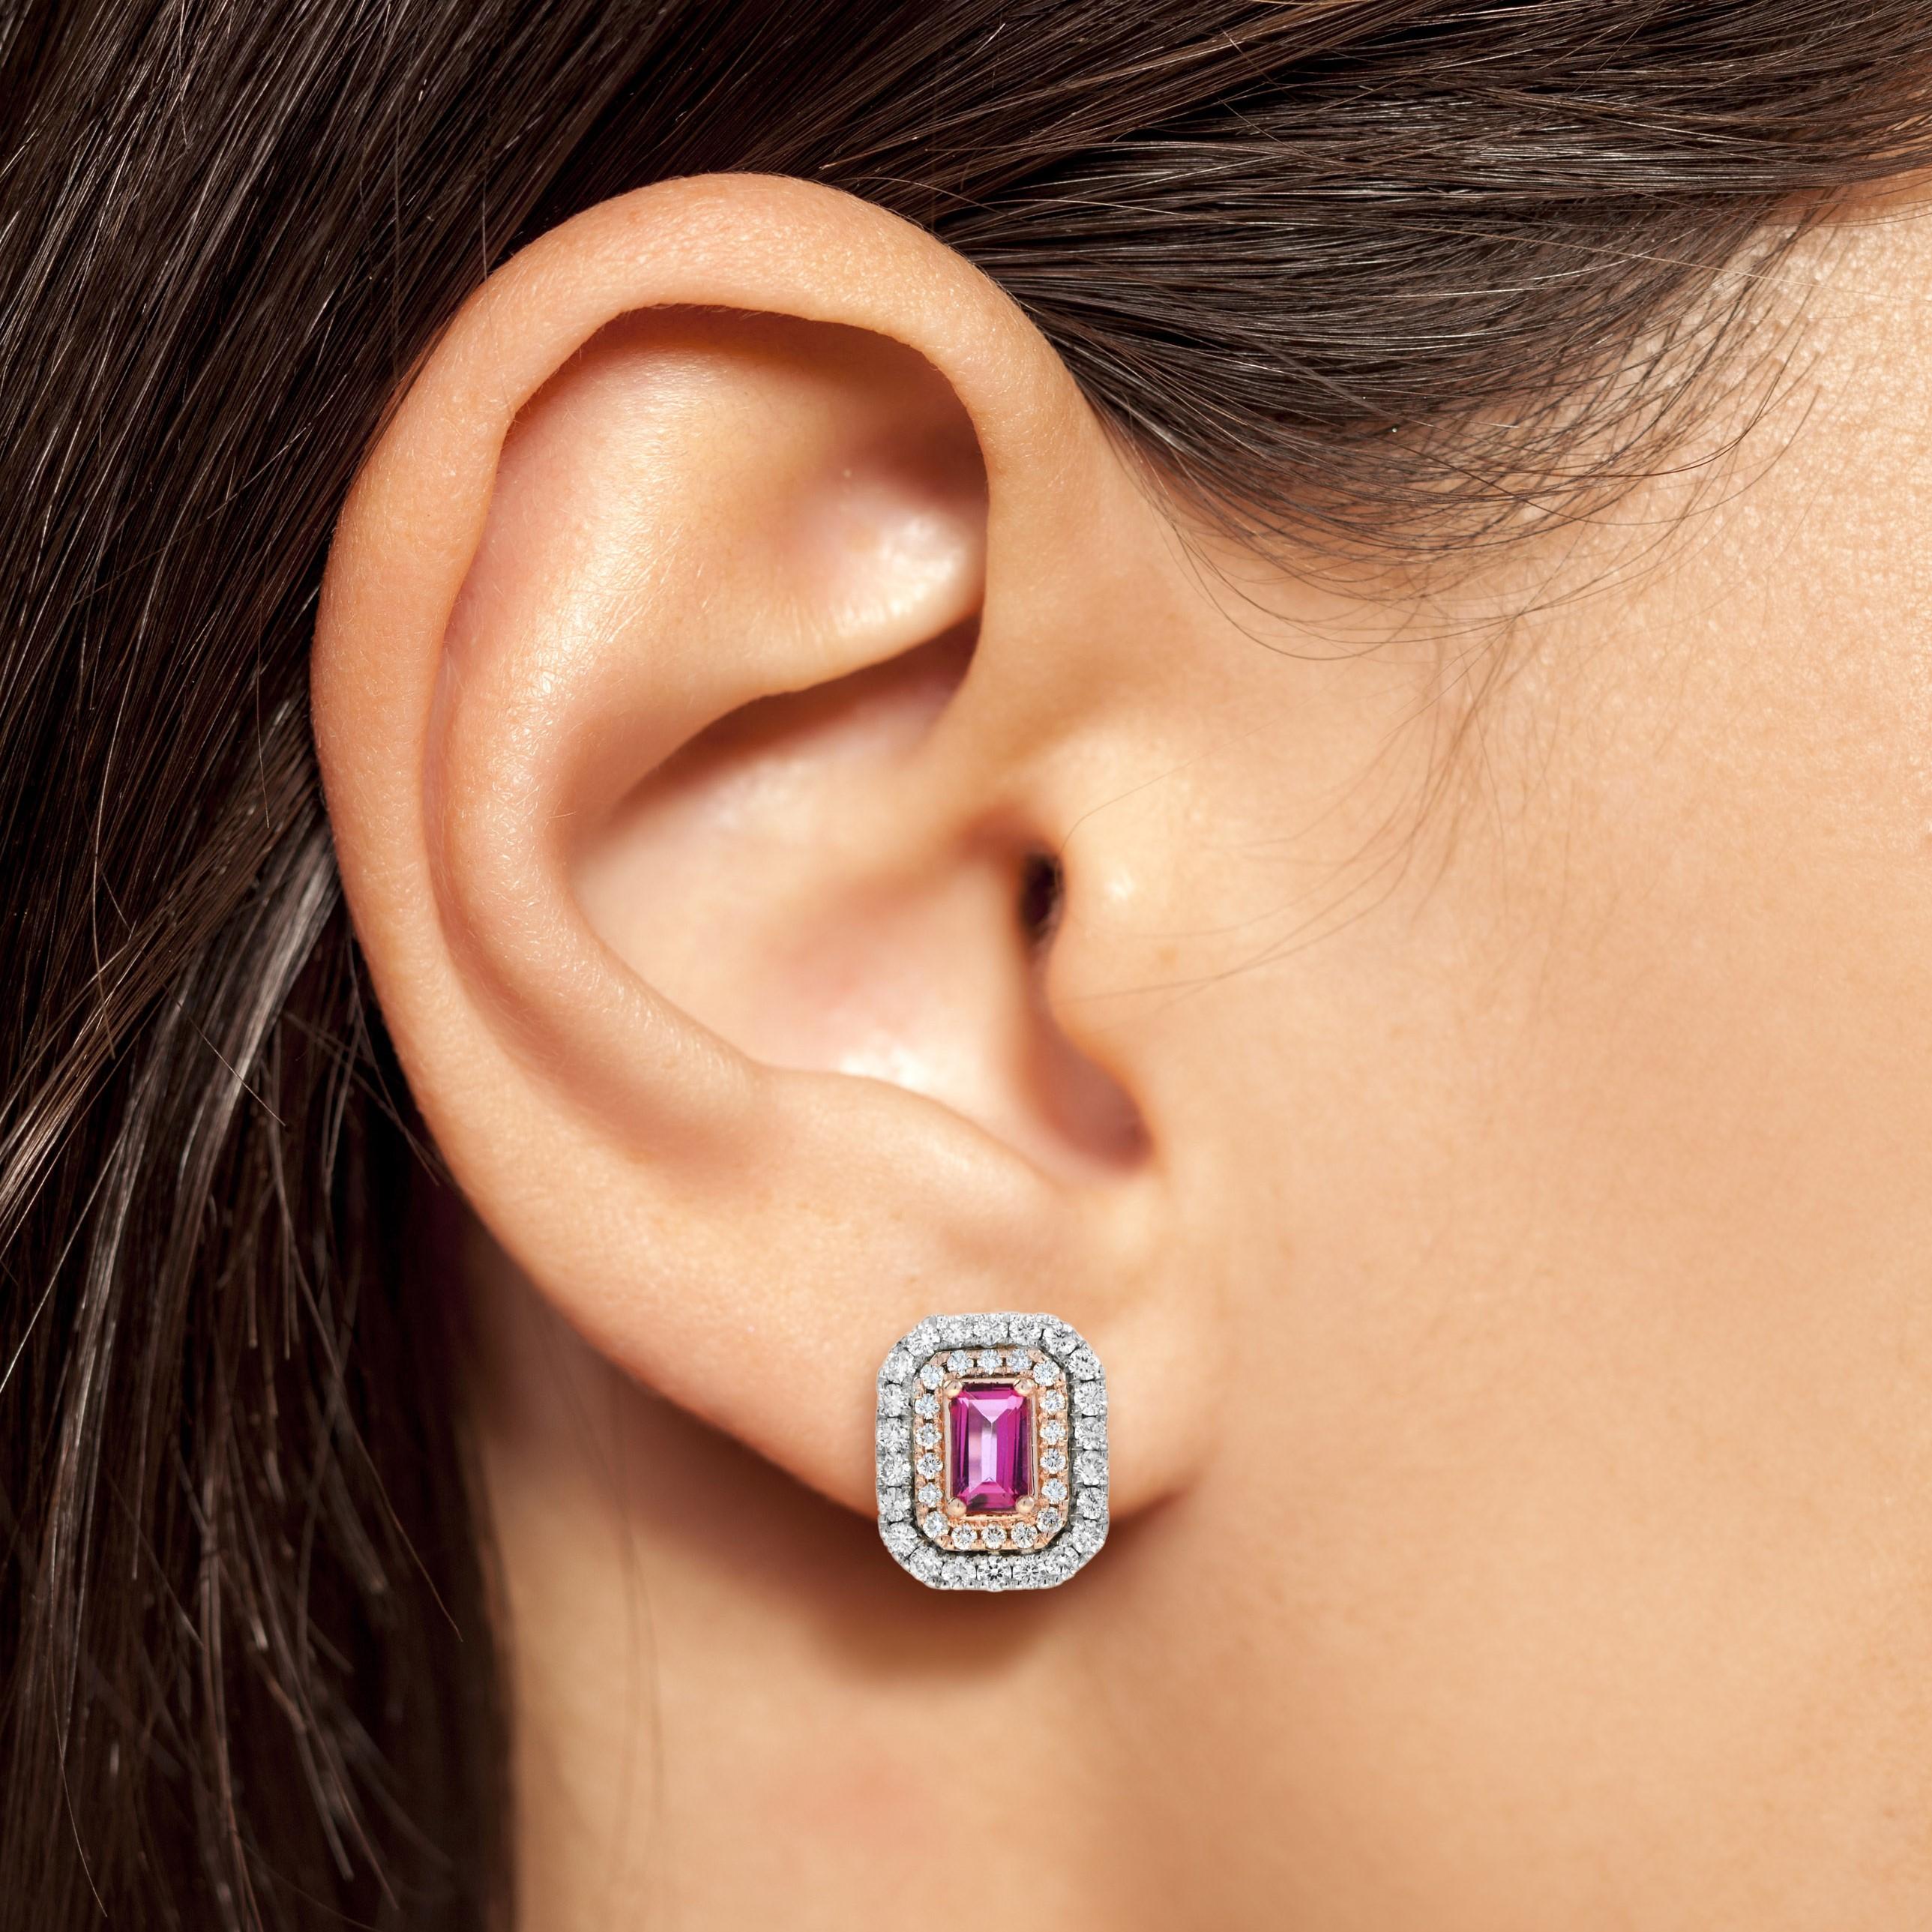 The two-tone version of standout double halo stud earrings are designed to hold 0.4 carat emerald cut pink sapphire for each center stone. The outer halo is in white gold while inner halo is rose gold. A truly spectacular stud earrings! Wear it with